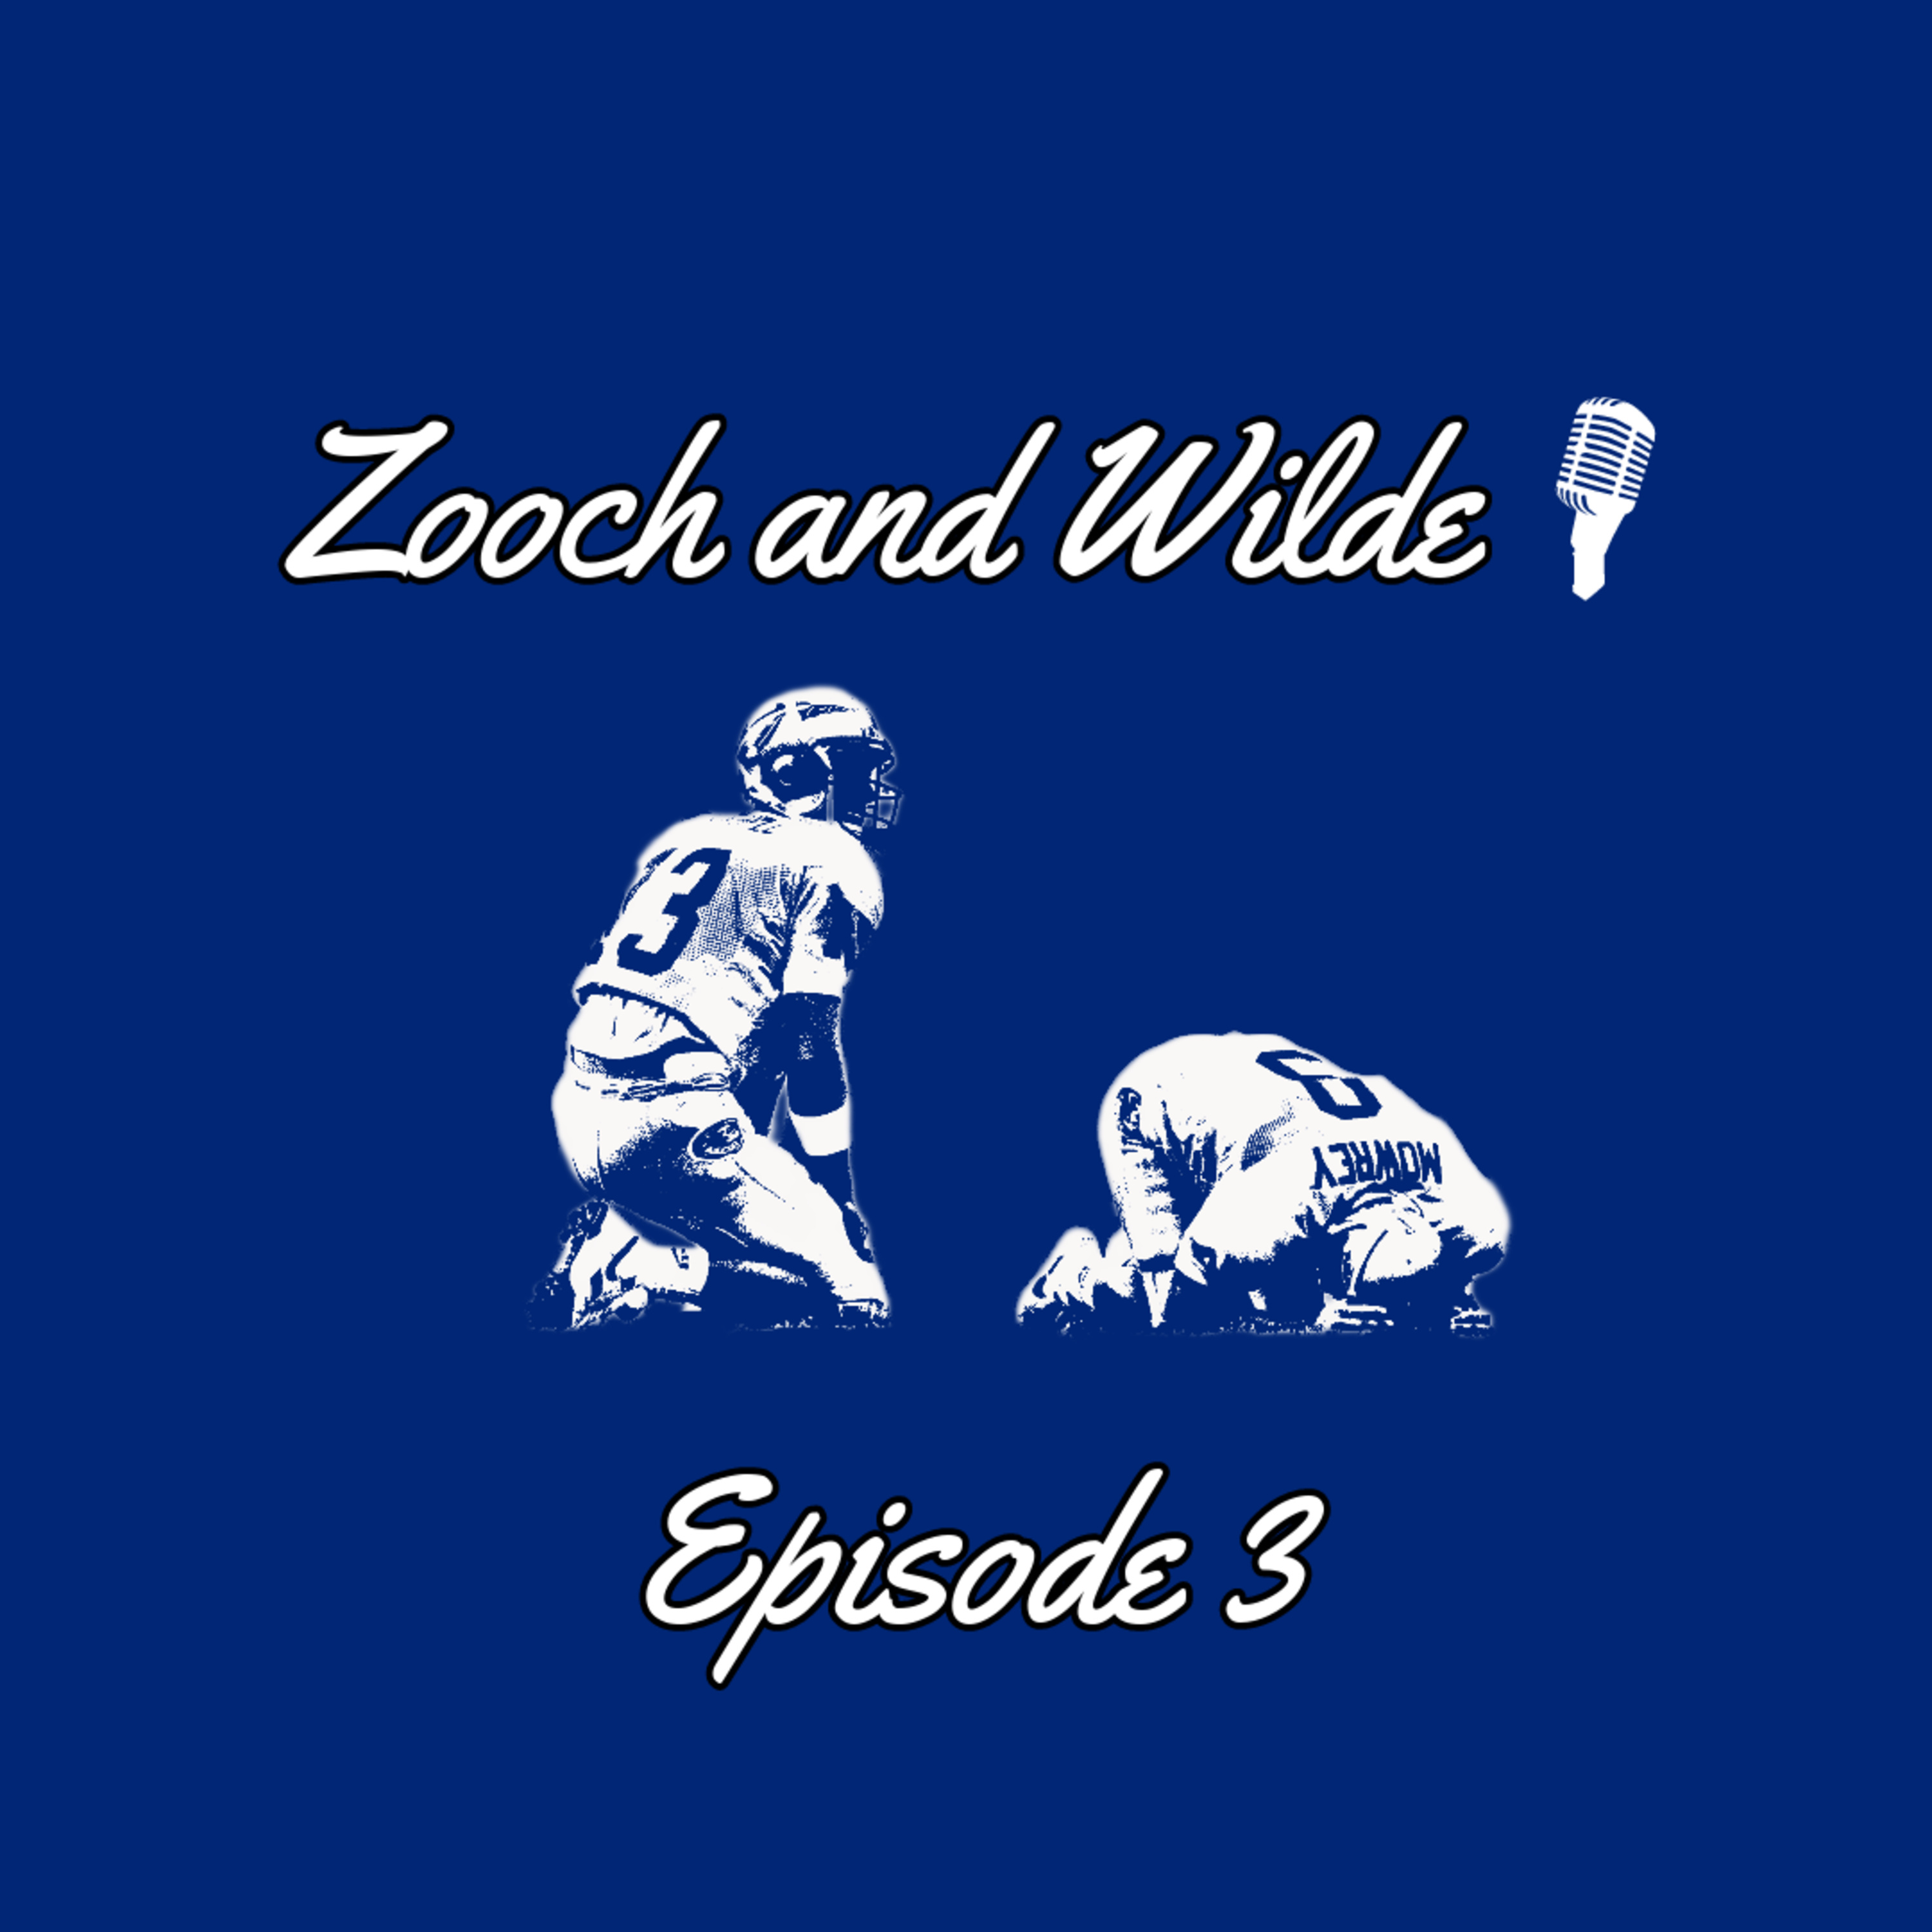 Zooch and Wilde Episode 3: Is Colorado Back? Coaches on the Hot Seat!